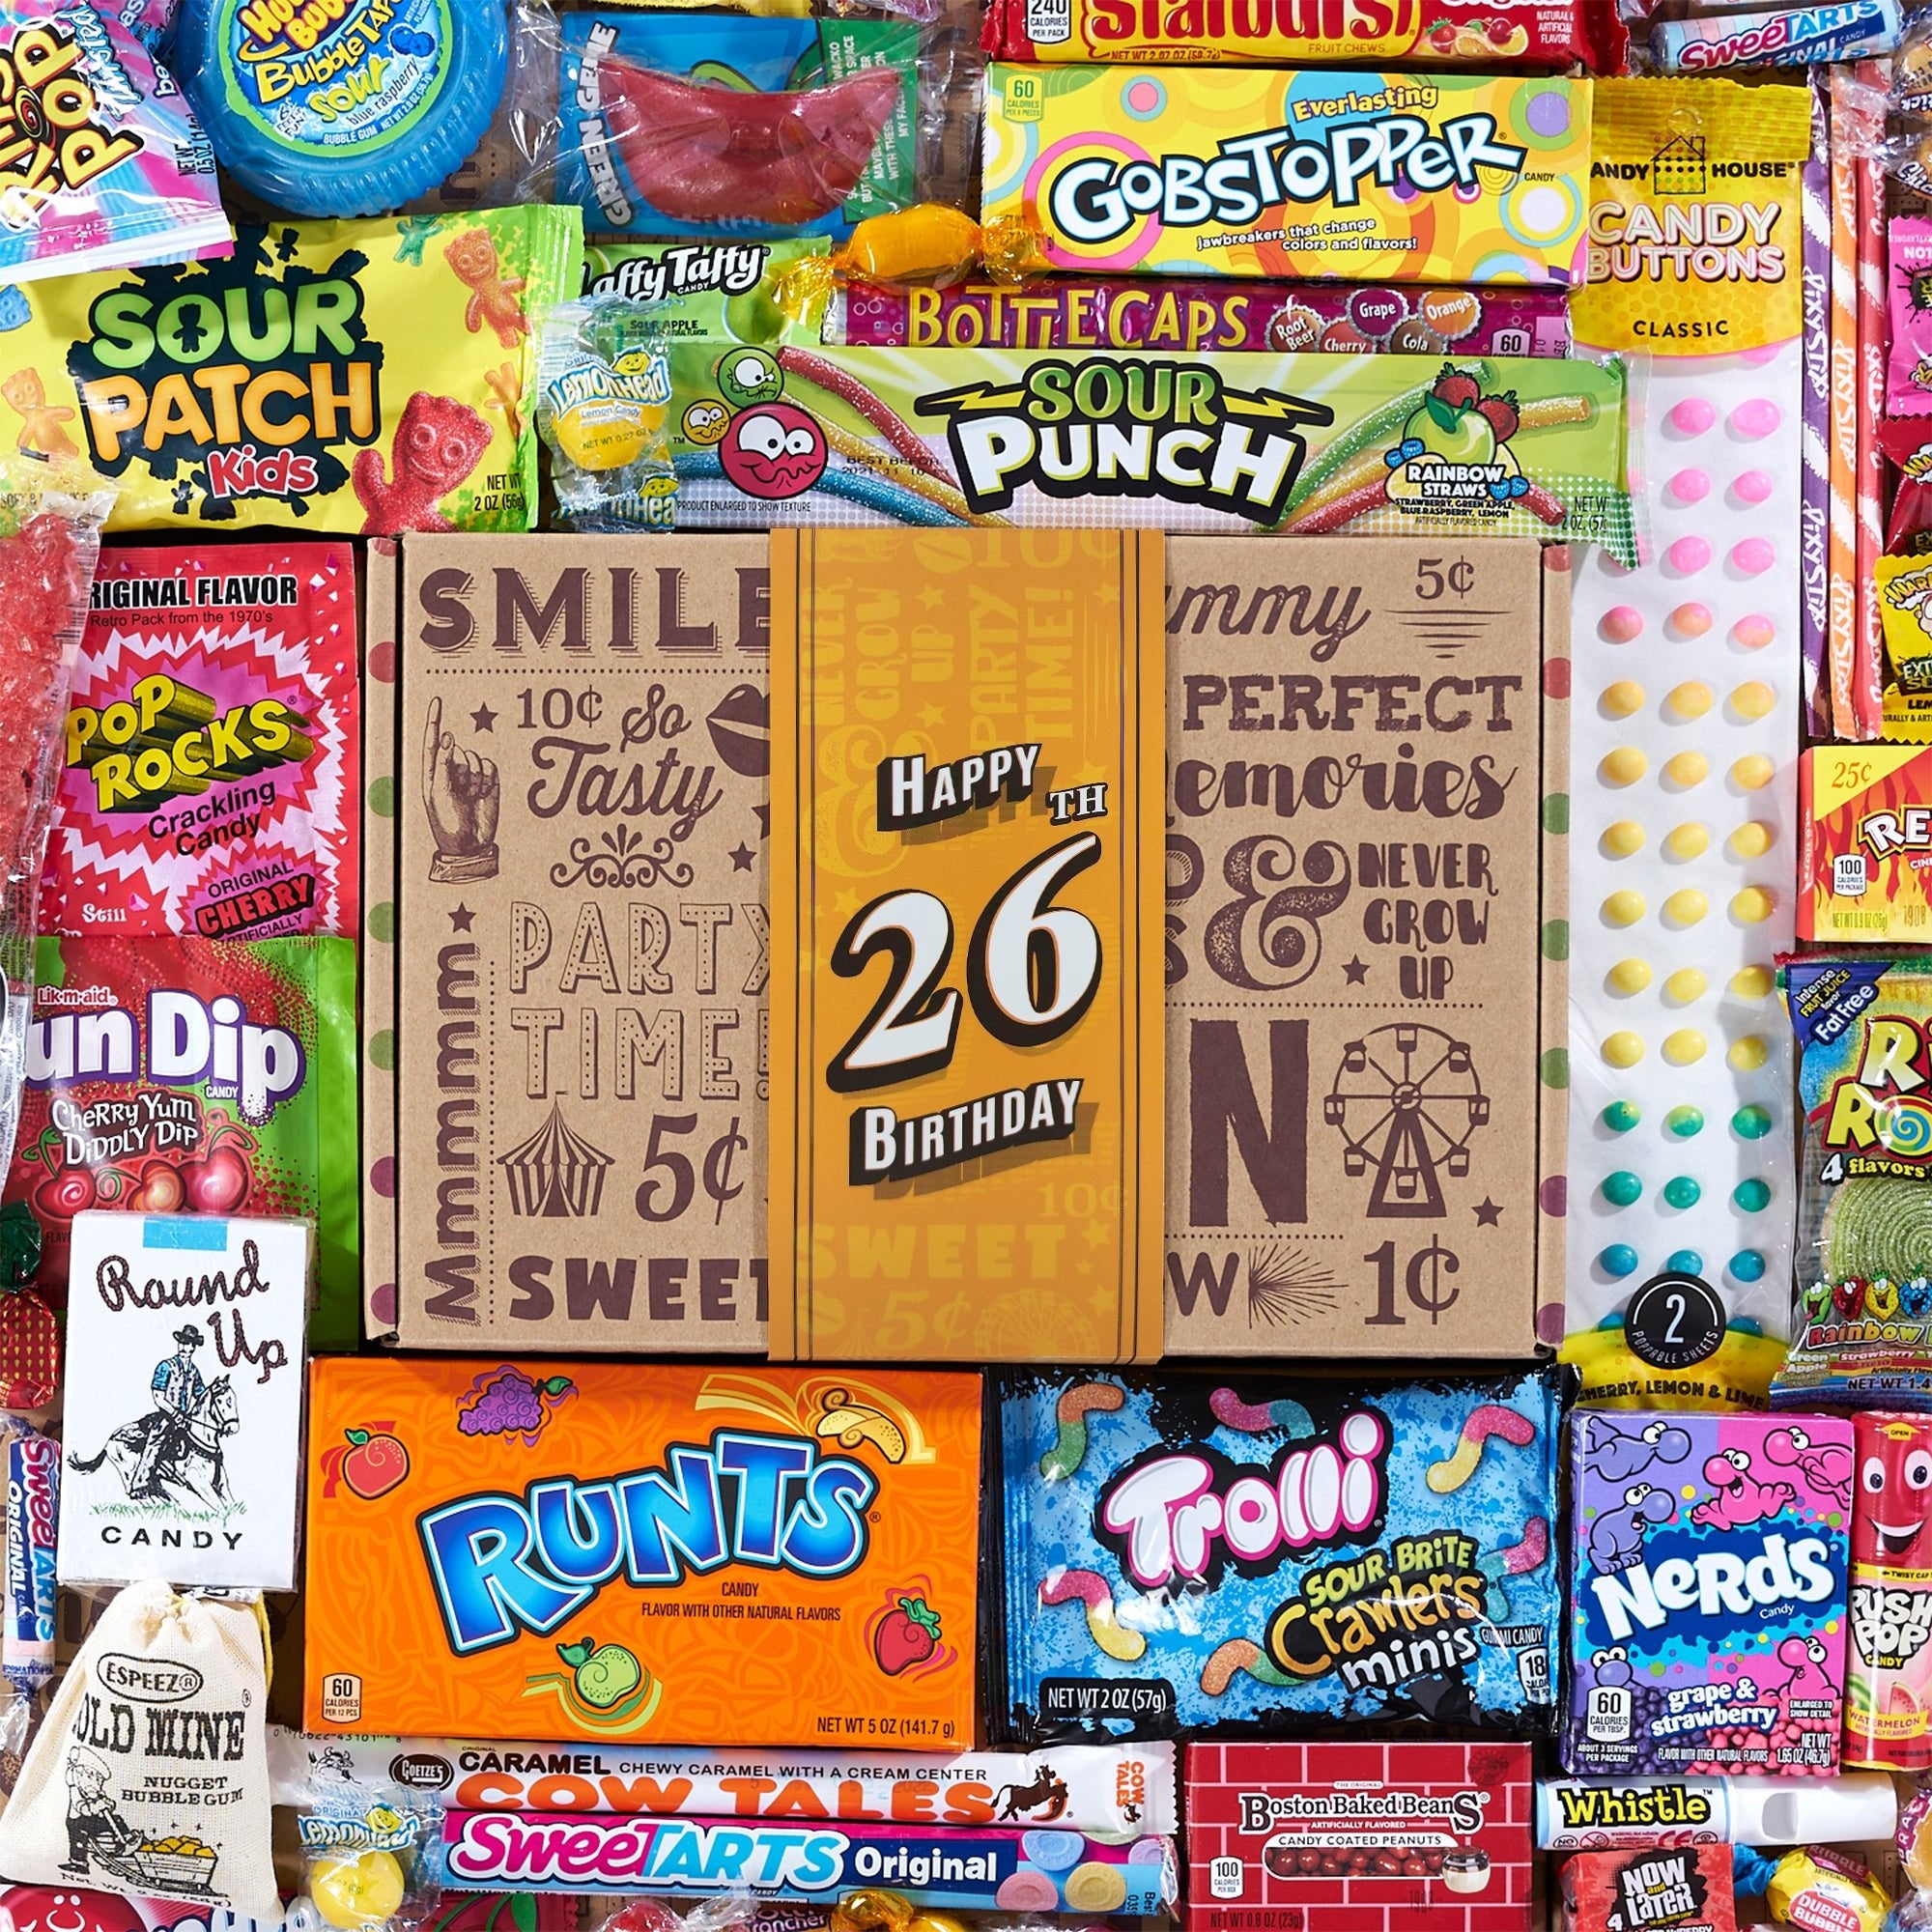 26th Birthday Retro Candy Gift - Vintage Candy Co.